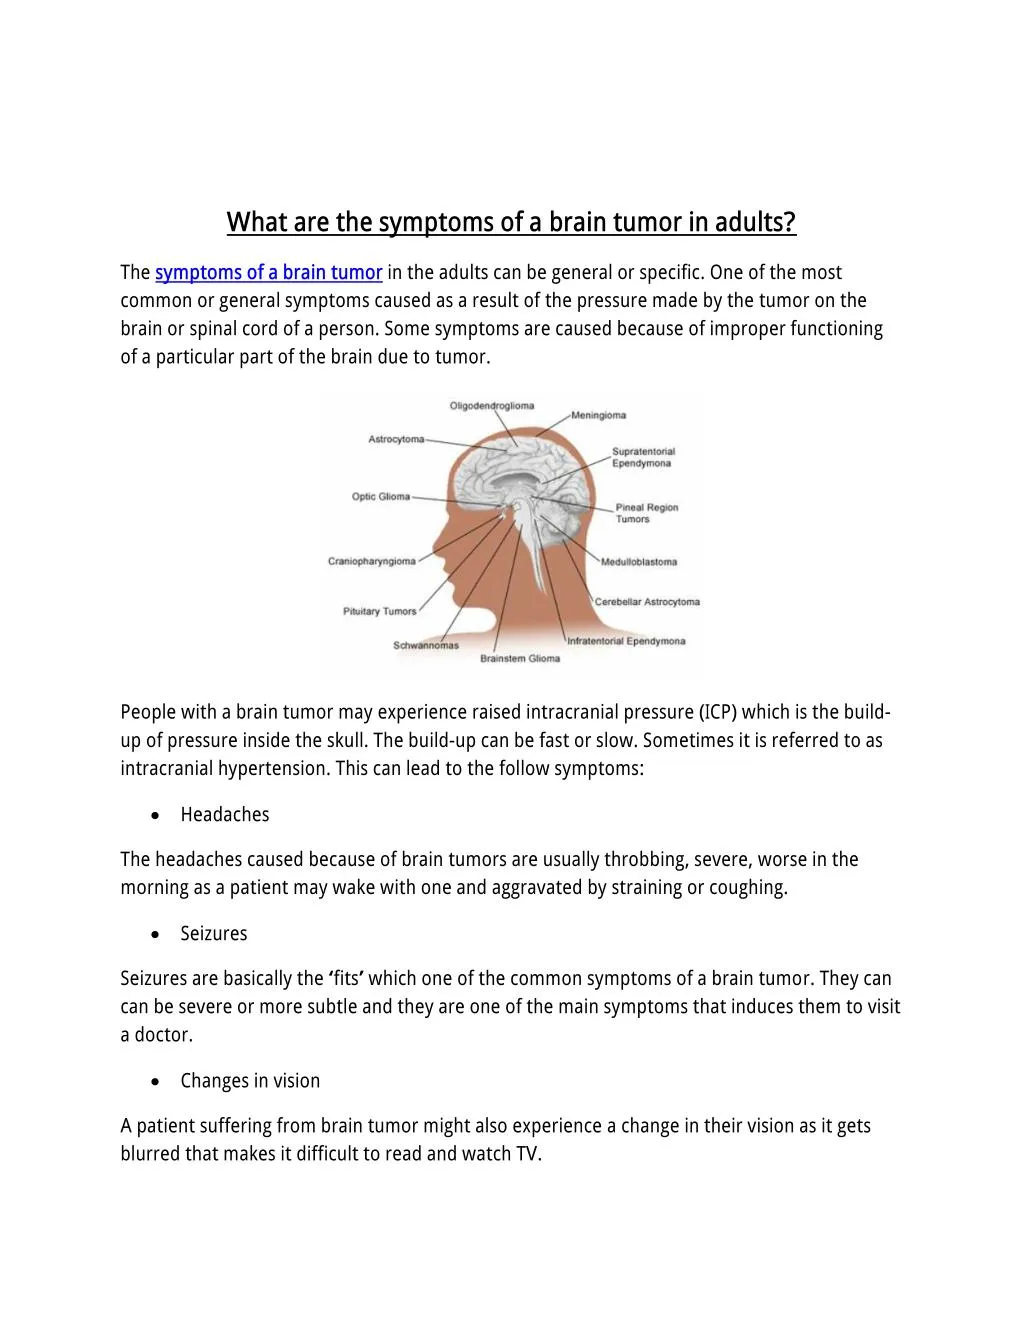 what are the symptoms of a brain tumor in adults